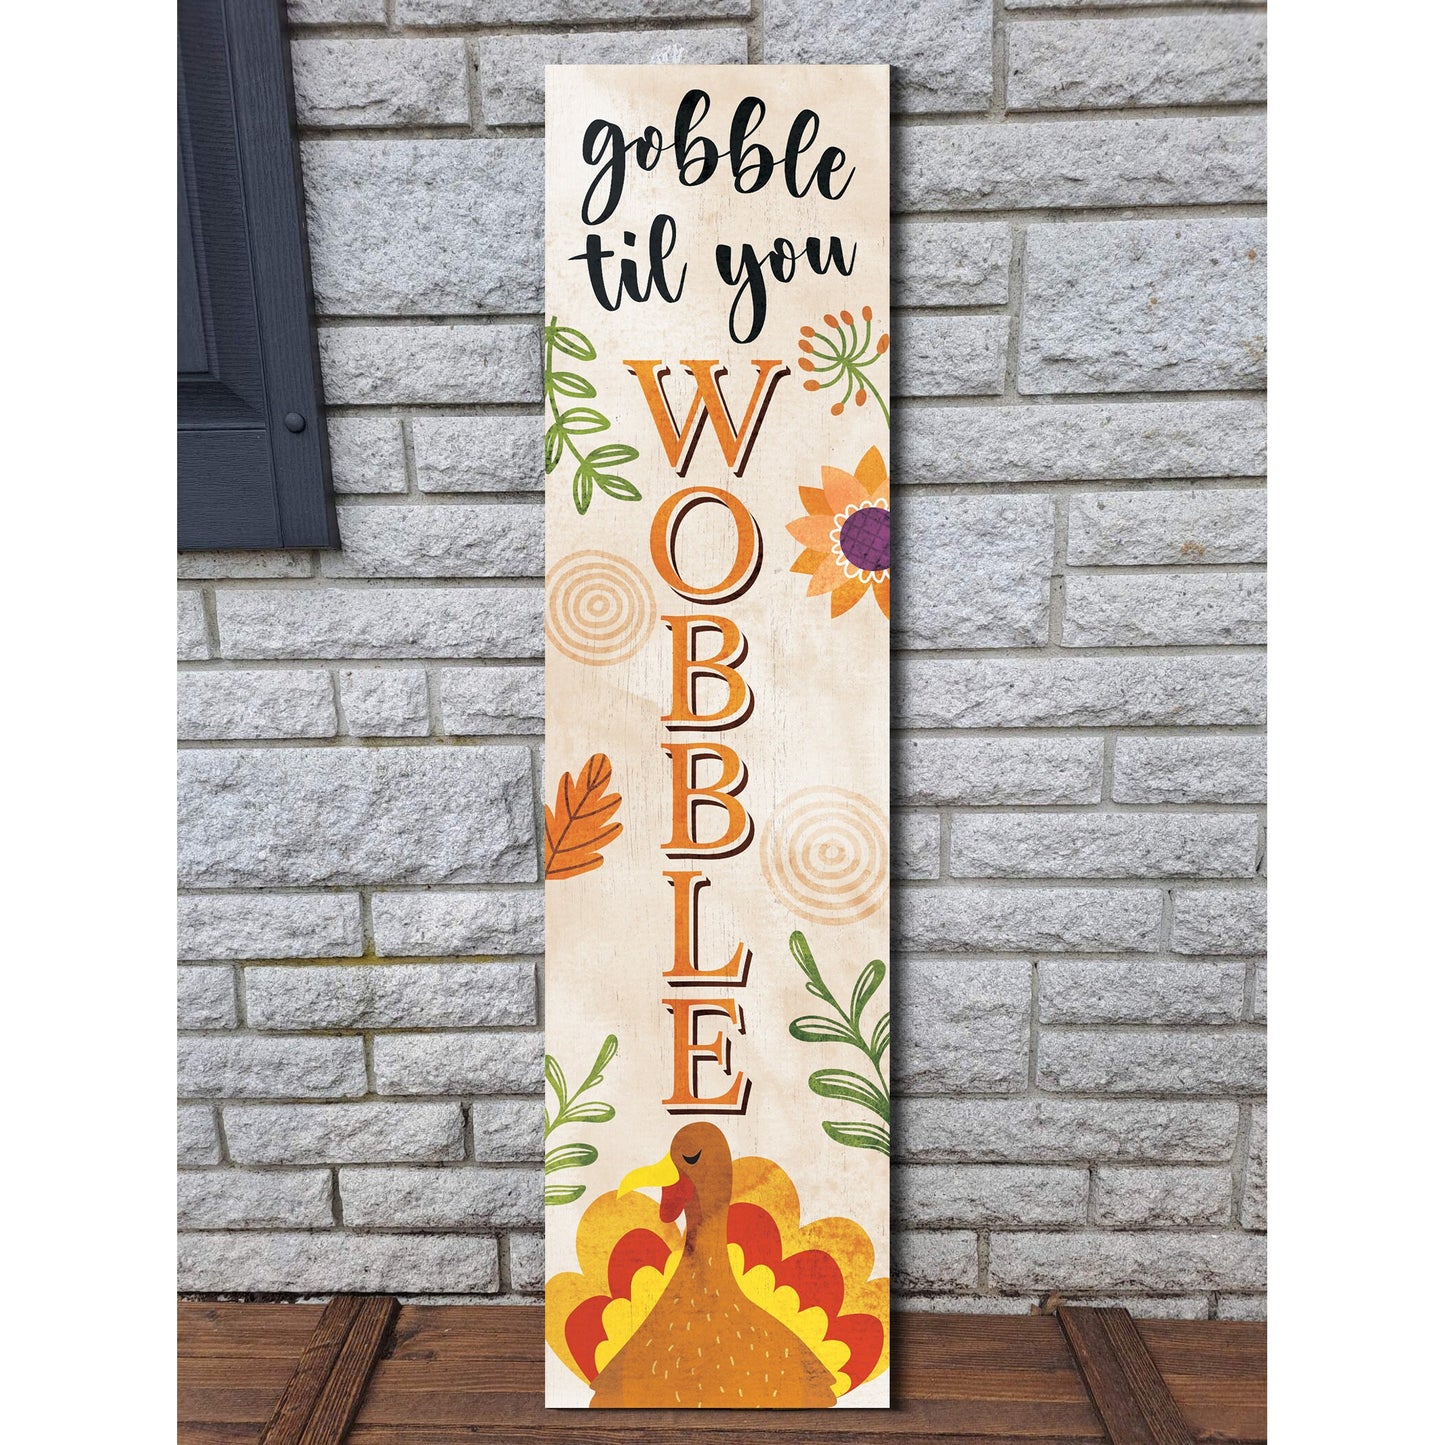 36in "Gobble Til You Wobble" Fall Porch Sign - Rustic Harvest Decor for Front Door Display during Thanksgiving Celebrations